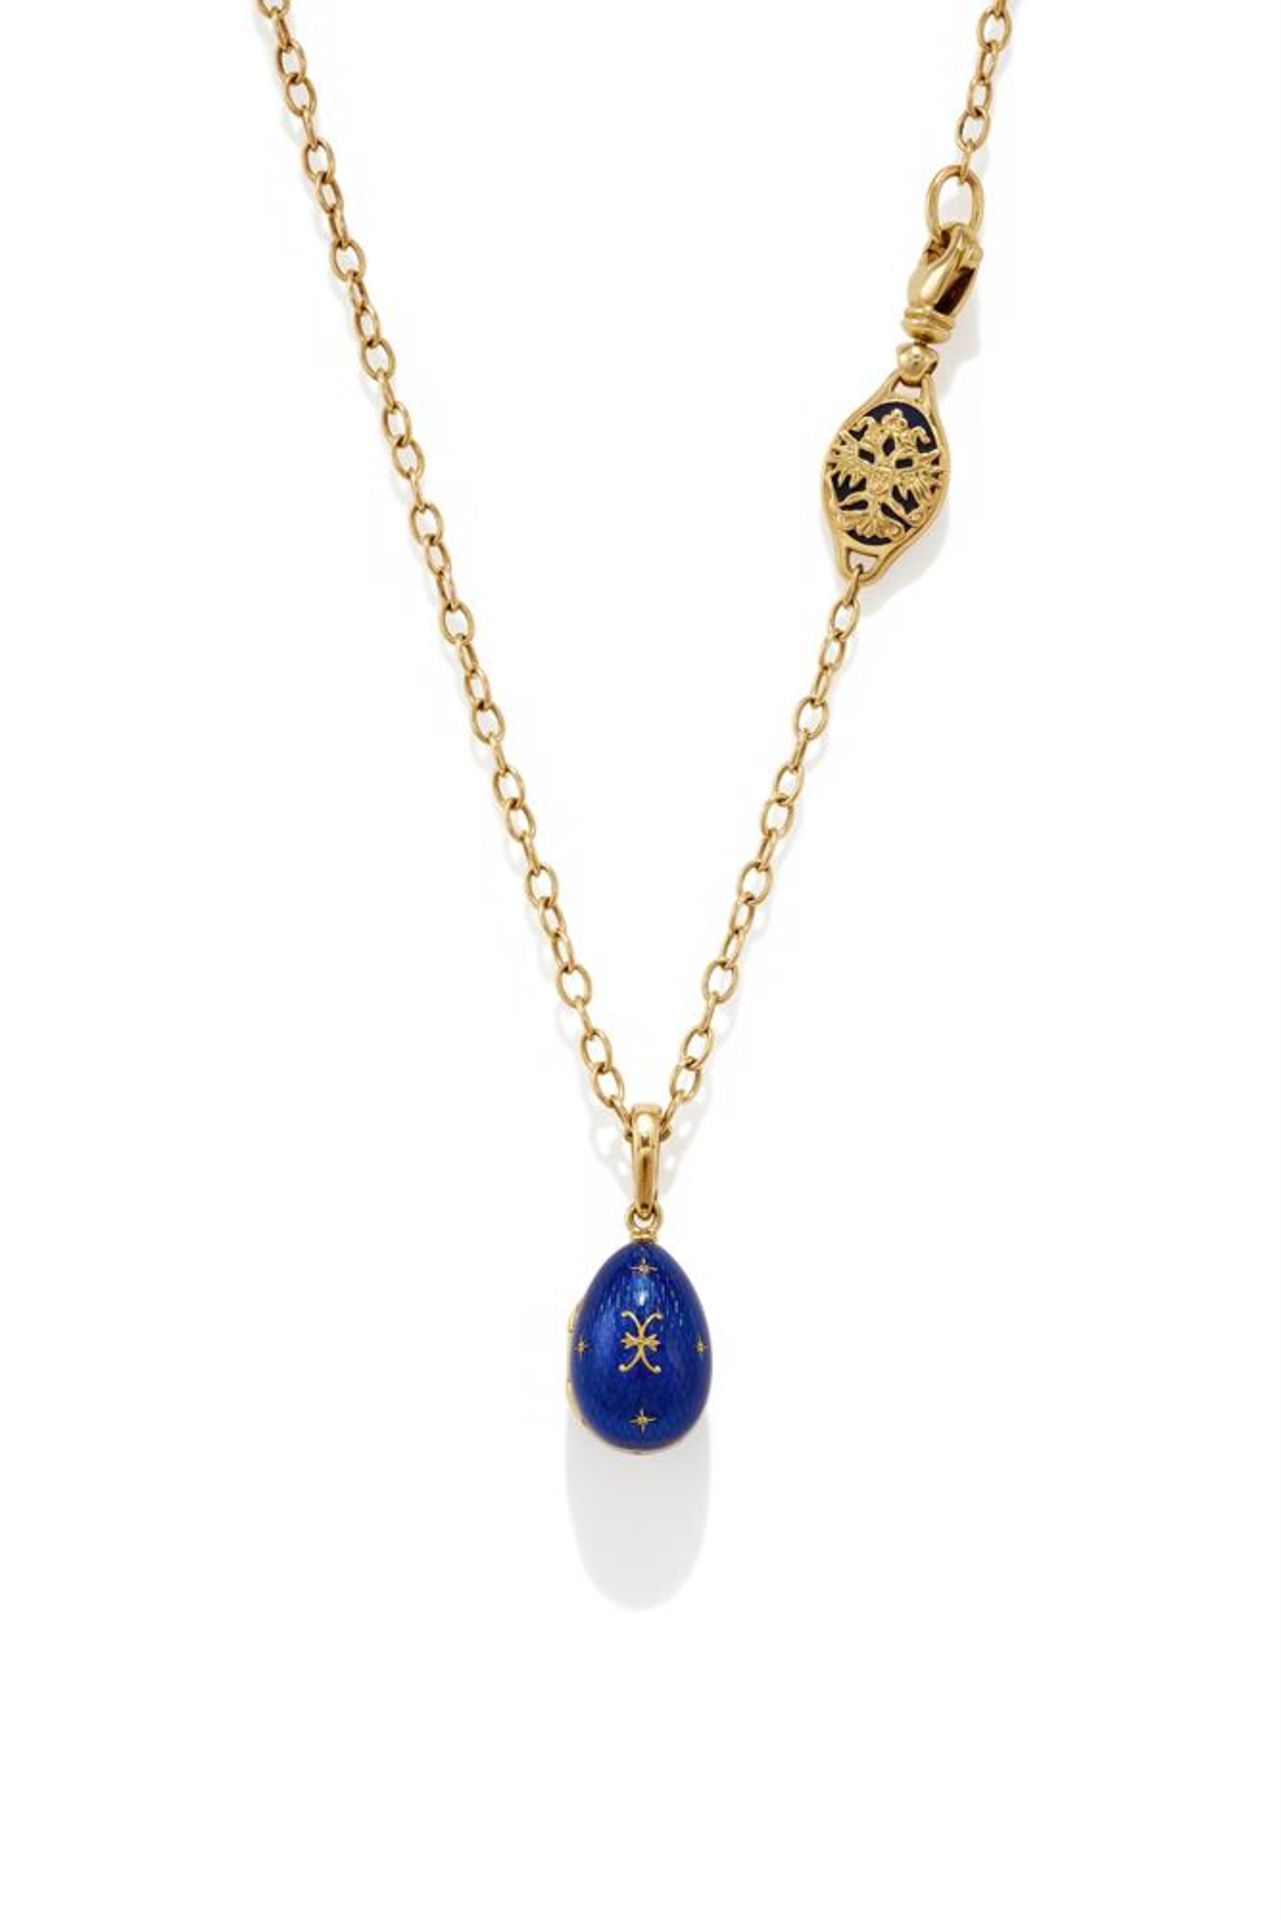 VICTOR MAYER FOR FABERGÉ, A MODERN BLUE ENAMEL EGG PENDANT ON CHAIN - Image 2 of 3